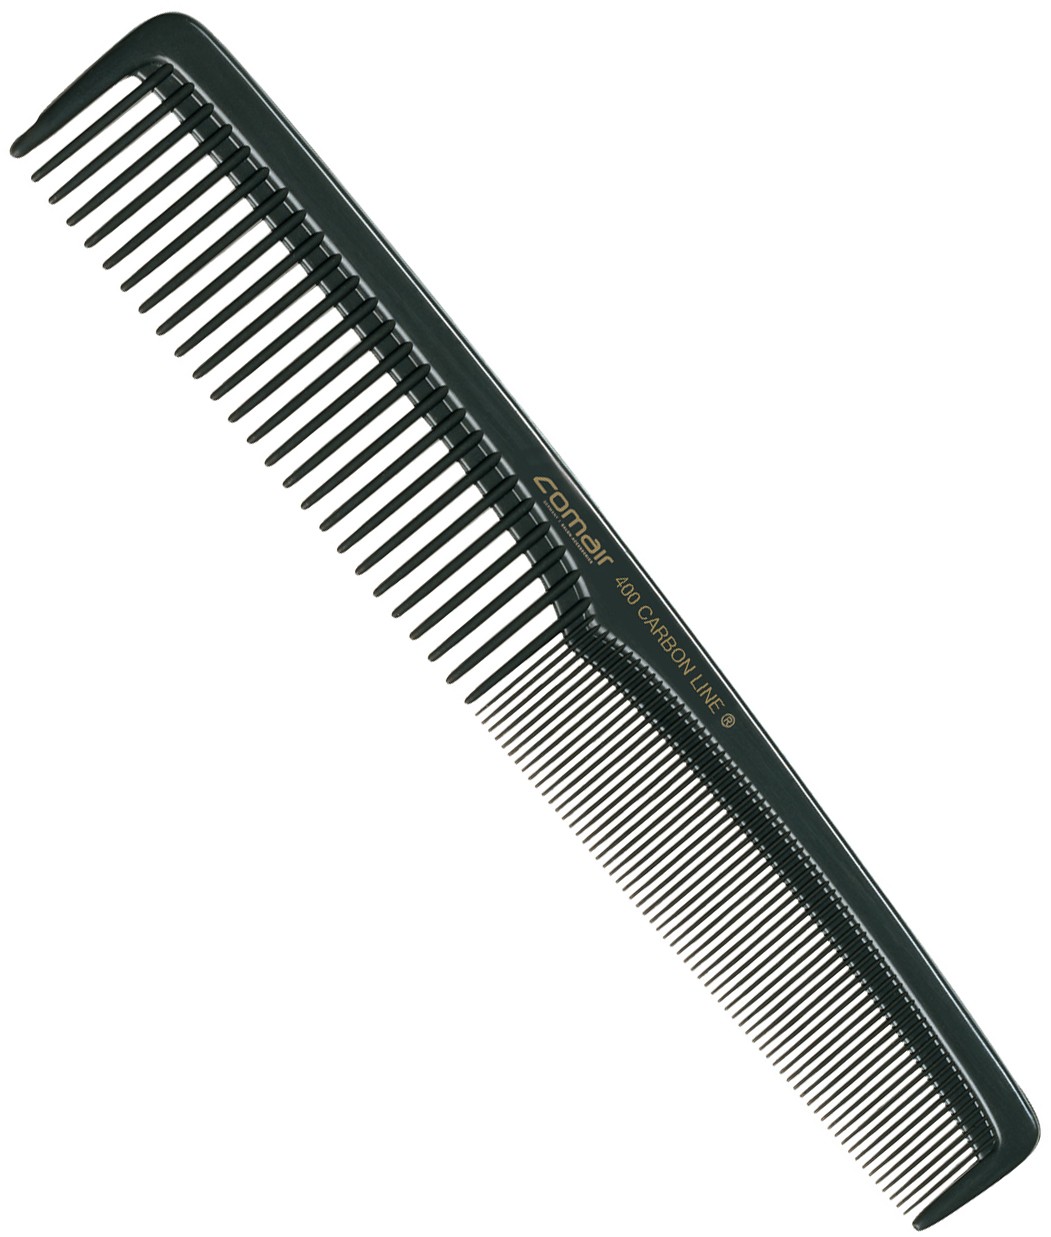  Comair Haircutting comb, wide #400 